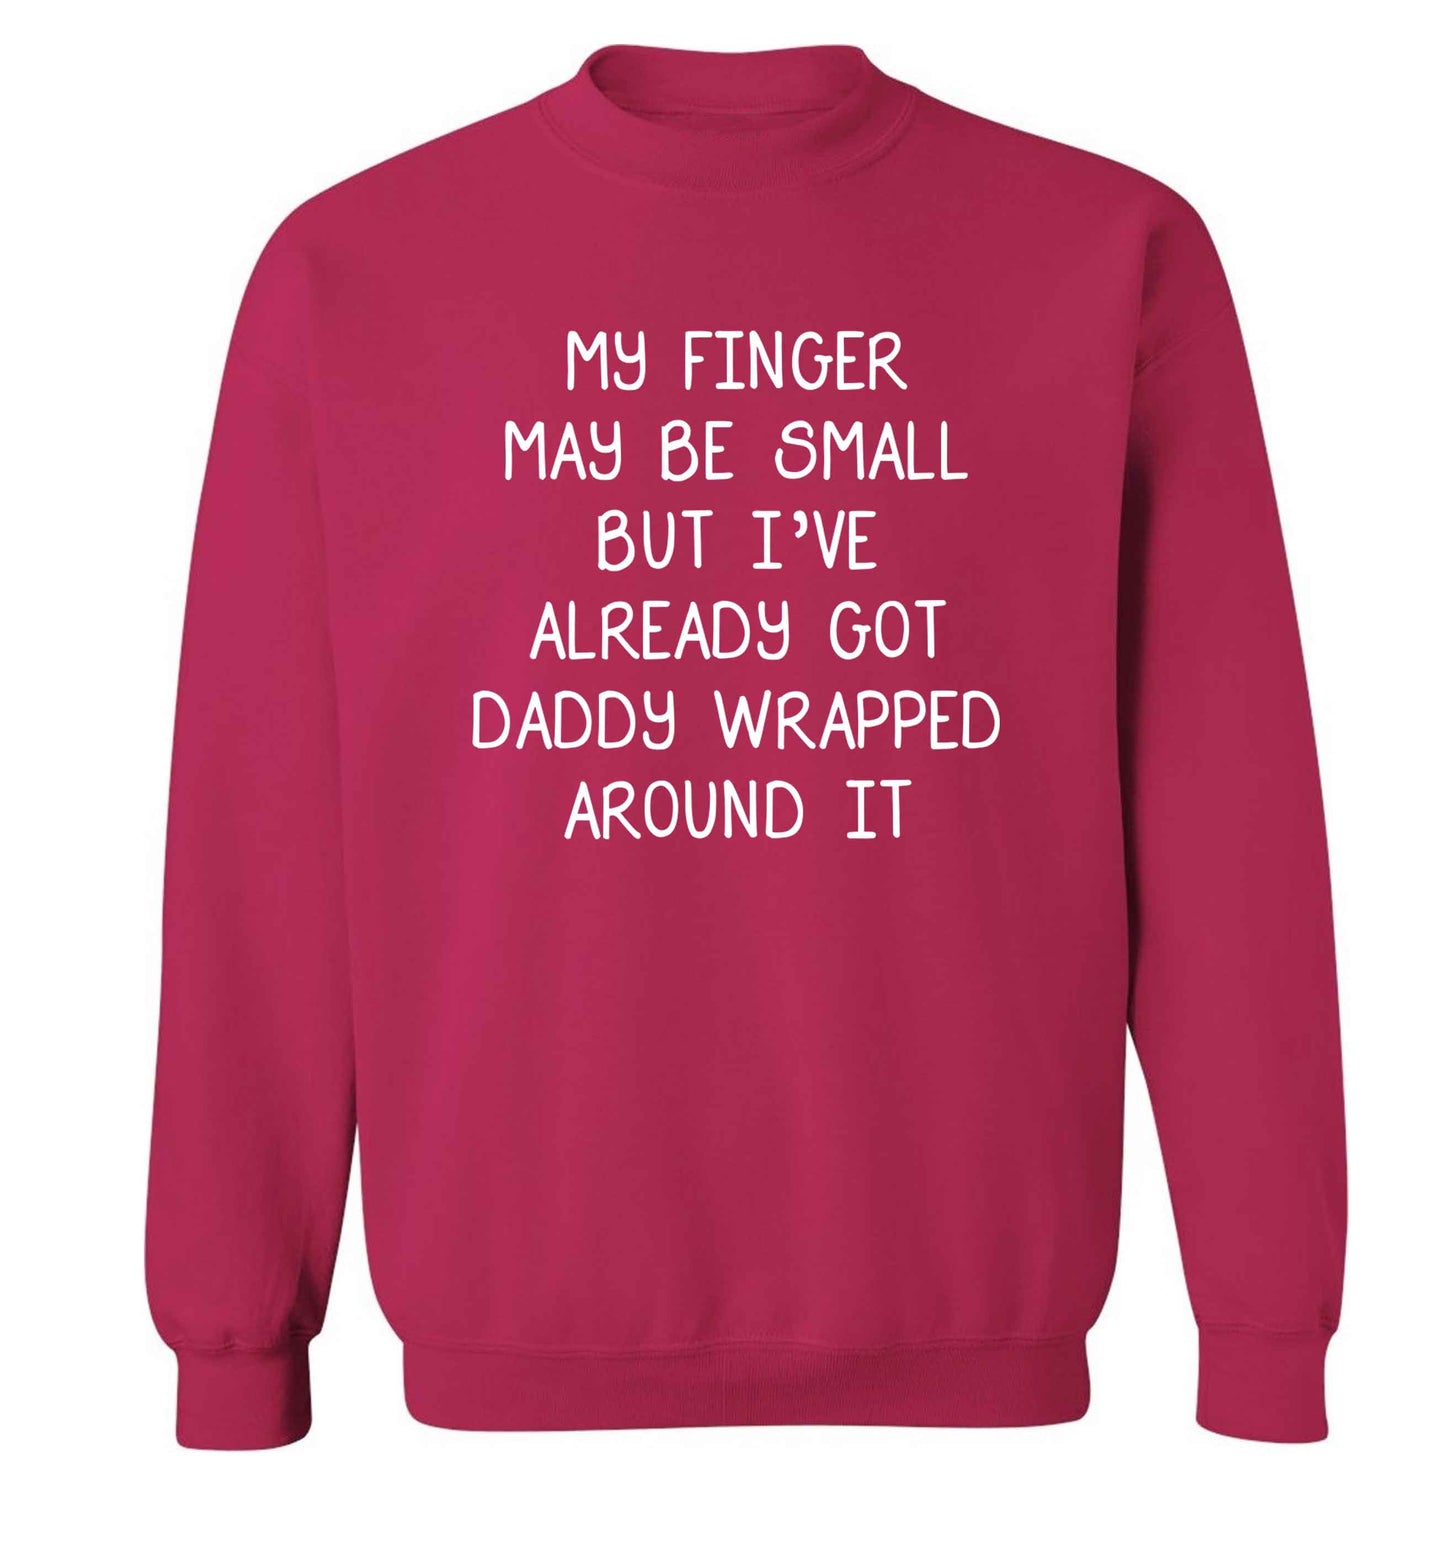 My finger may be small but I've already got daddy wrapped around it adult's unisex pink sweater 2XL